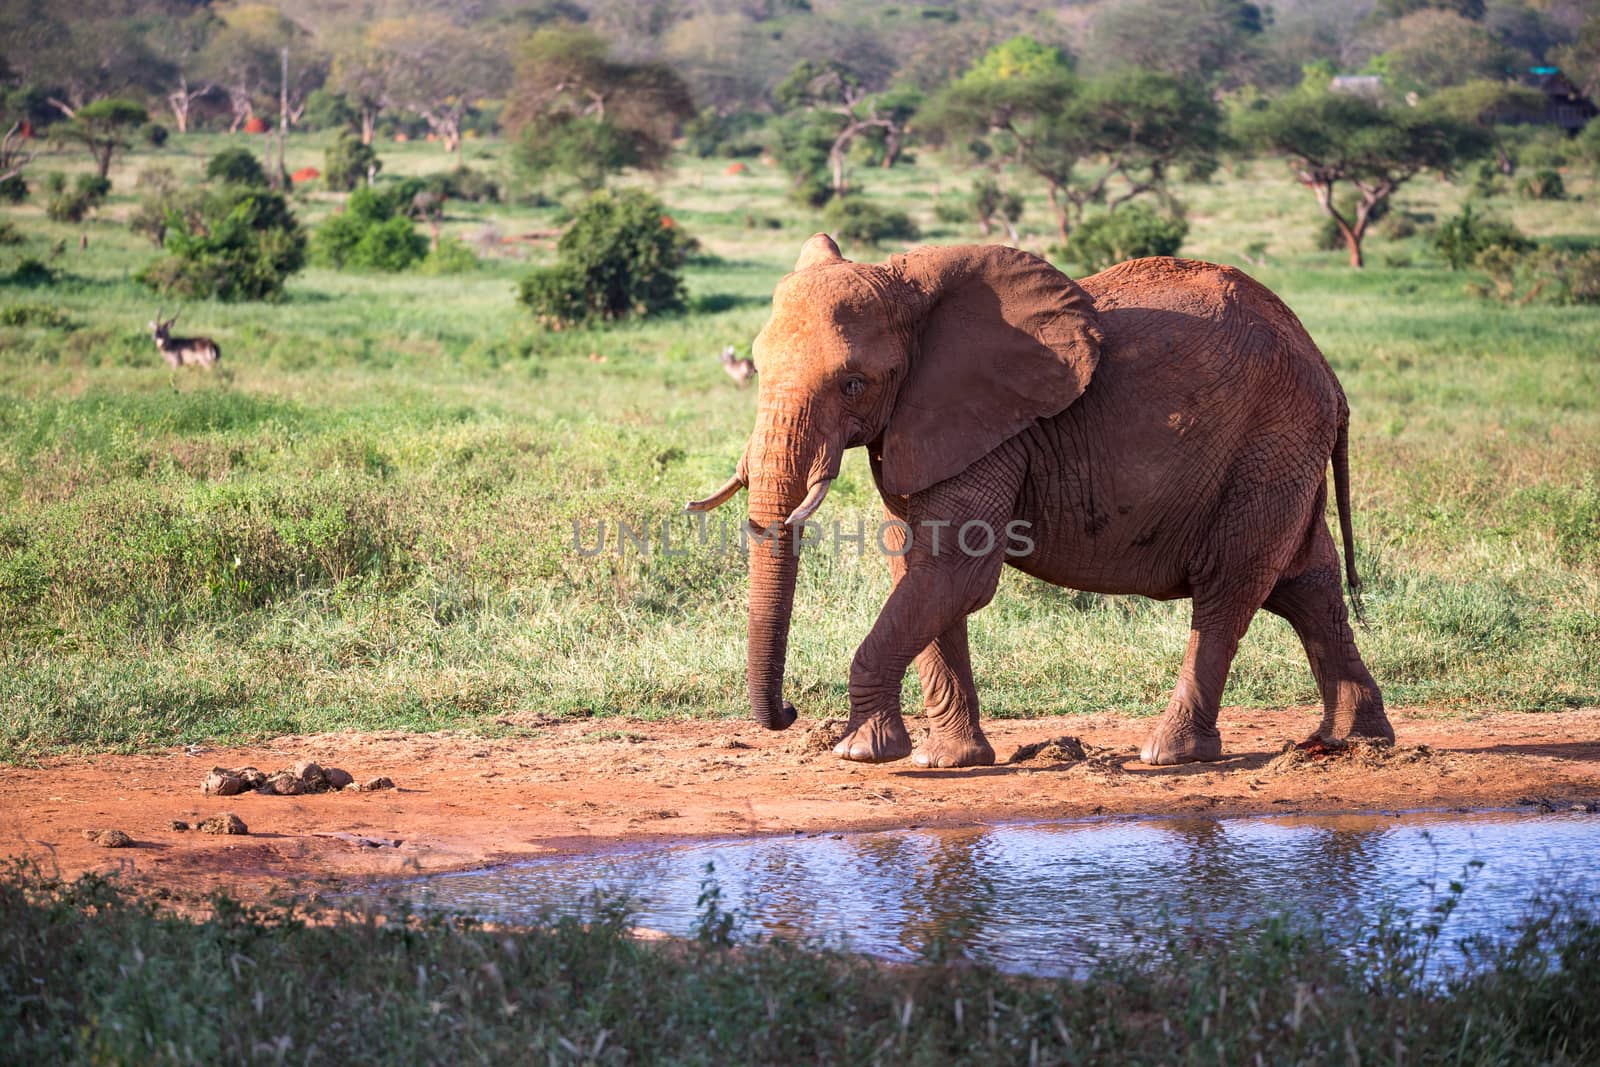 A family of red elephants at a water hole in the middle of the s by 25ehaag6